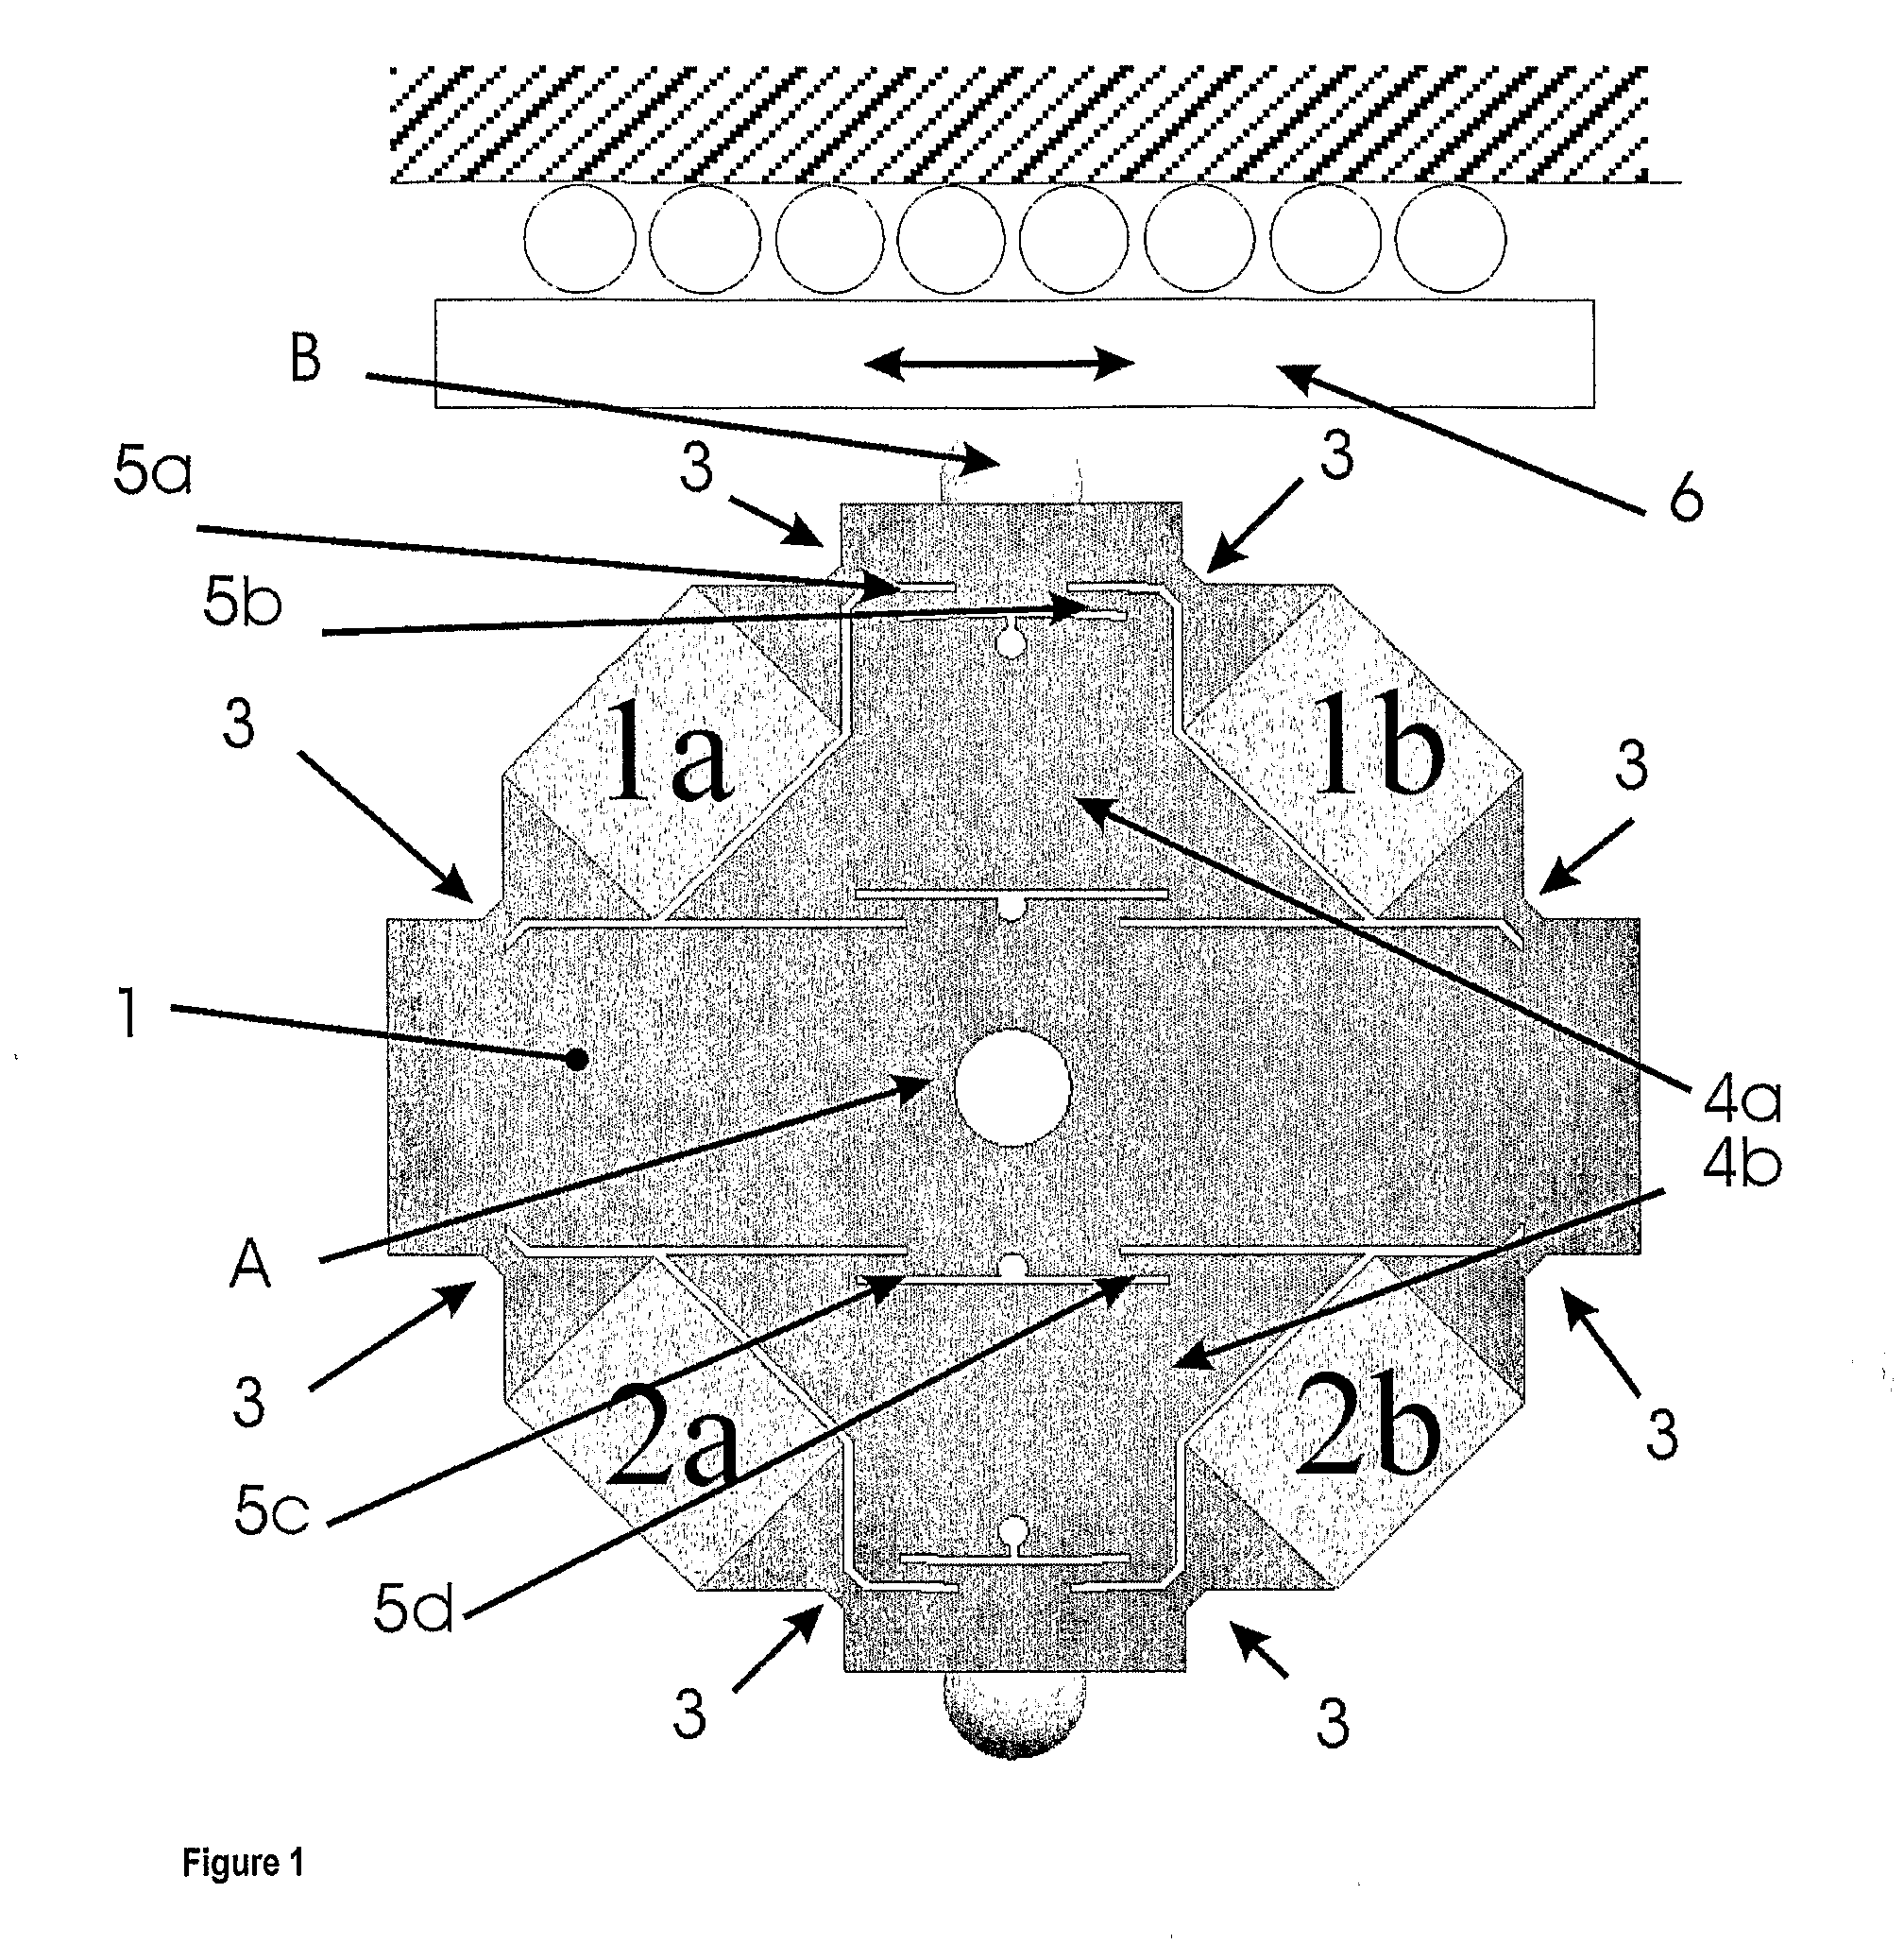 Positioning Motor and Apparatus